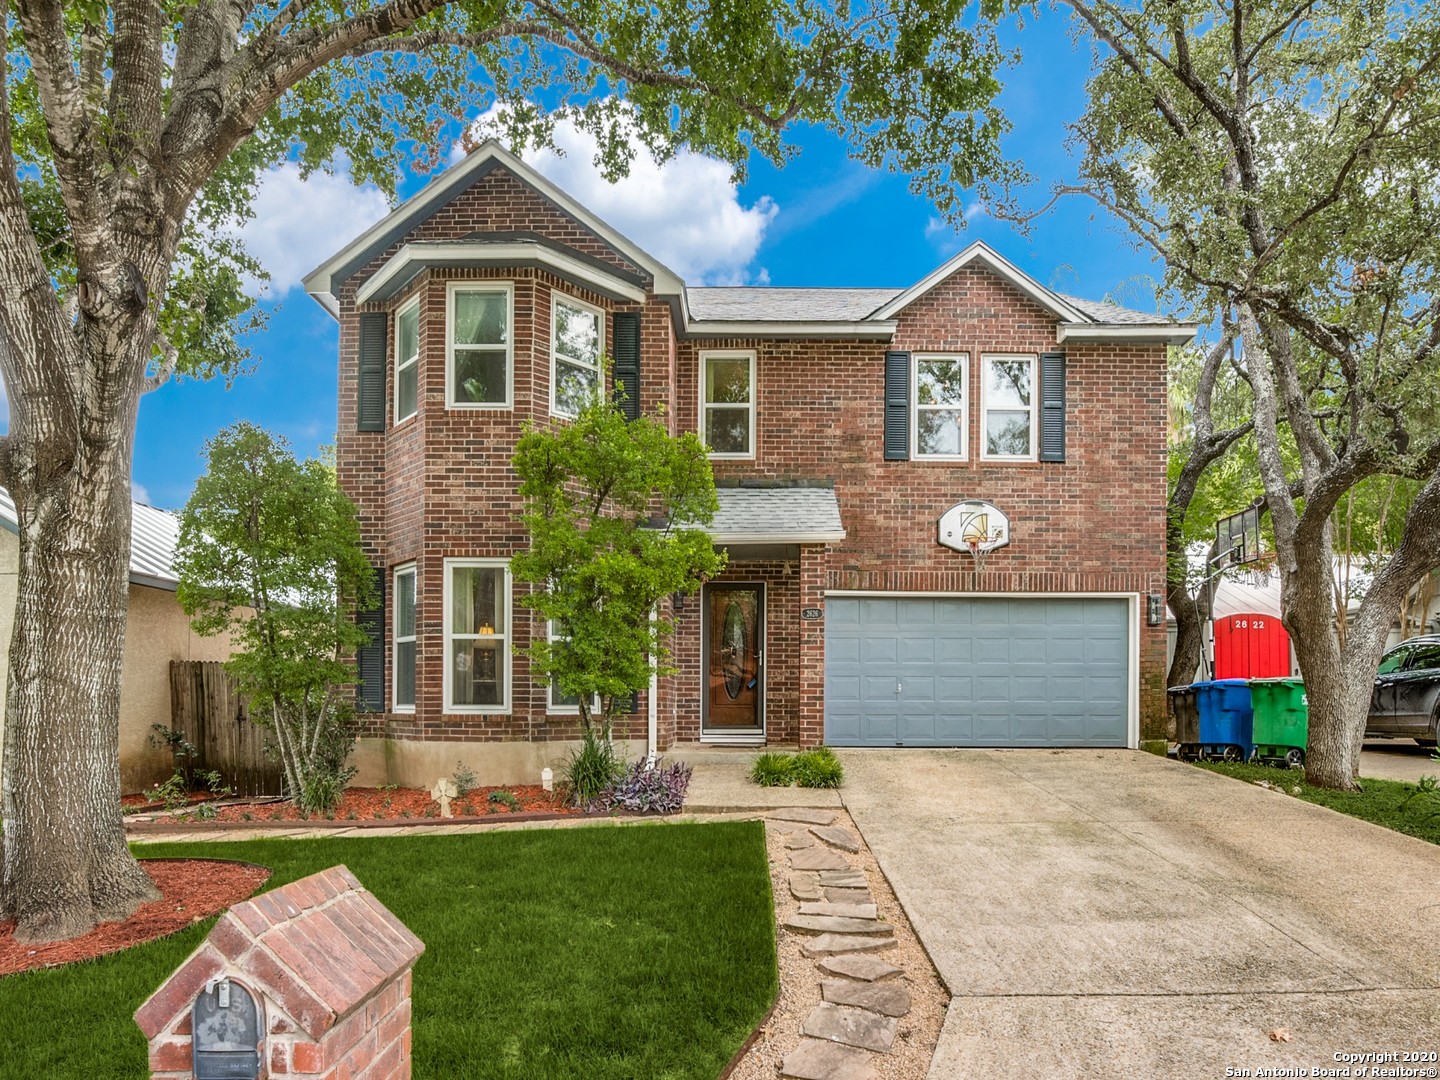 Photo of 2626 Country Square St in San Antonio, TX